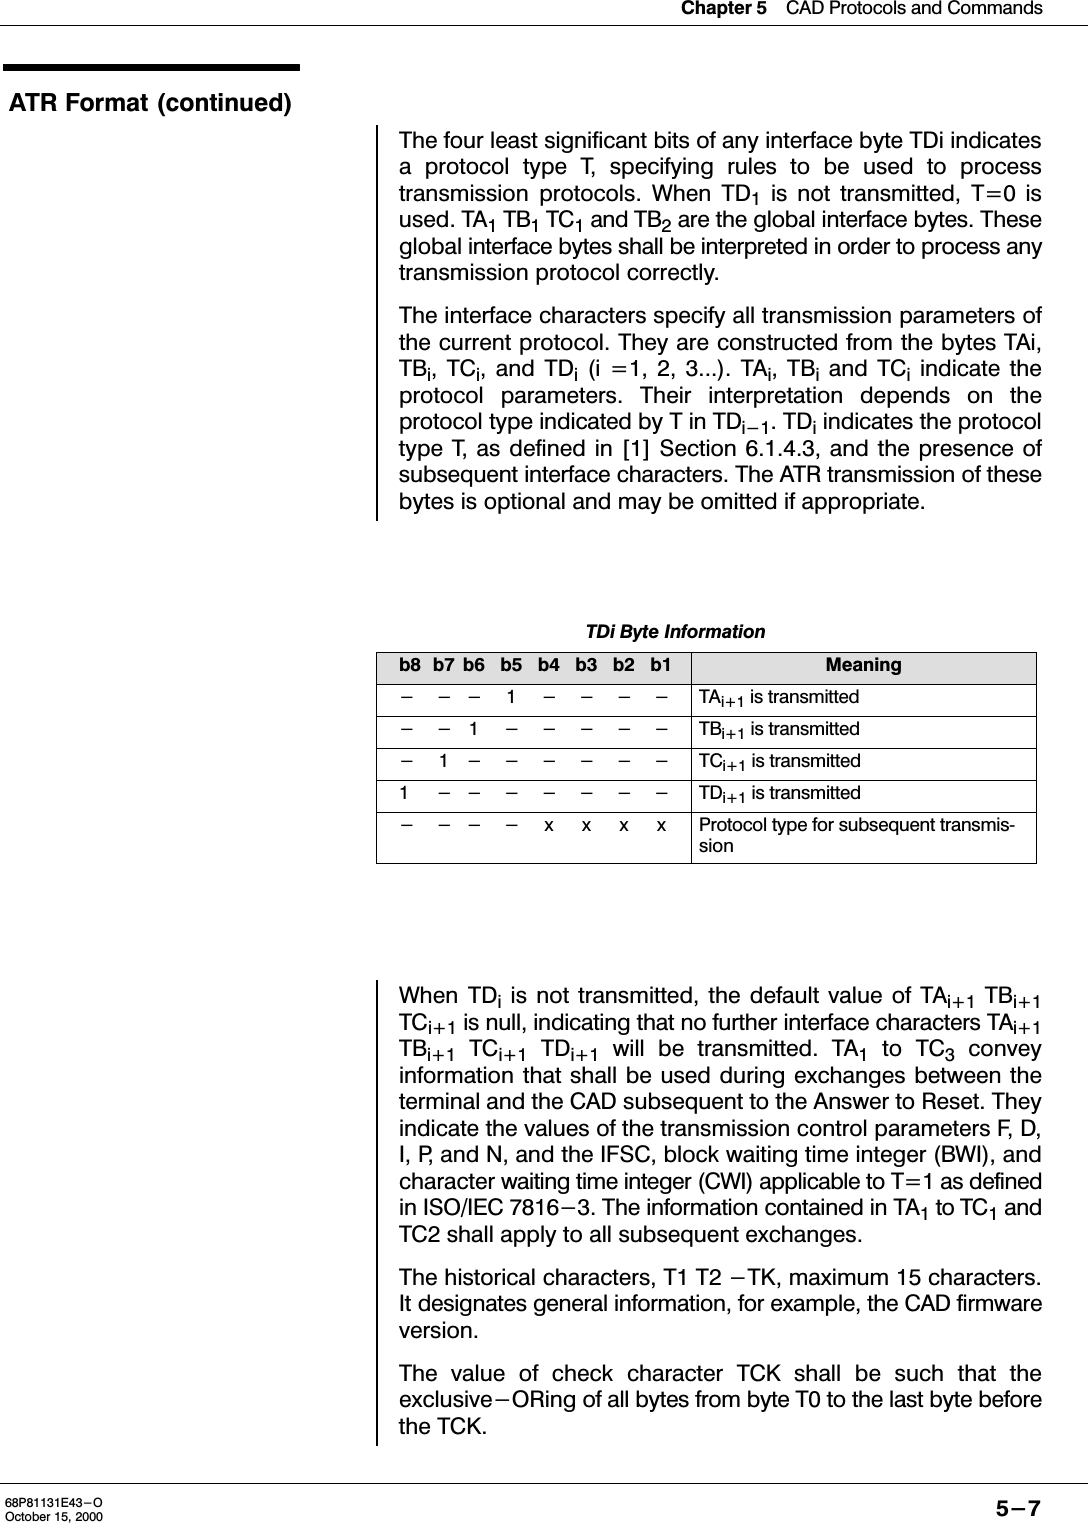 Chapter 5CAD Protocols and Commands5-768P81131E43-OOctober 15, 2000ATR Format (continued)The four least significant bits of any interface byte TDi indicatesa protocol type T, specifying rules to be used to processtransmission protocols. When TD1 is not transmitted, T=0 isused. TA1 TB1 TC1 and TB2 are the global interface bytes. Theseglobal interface bytes shall be interpreted in order to process anytransmission protocol correctly.The interface characters specify all transmission parameters ofthe current protocol. They are constructed from the bytes TAi,TBi, TCi, and TDi (i =1, 2, 3...). TAi, TBi and TCi indicate theprotocol parameters. Their interpretation depends on theprotocol type indicated by T in TDi-1. TDi indicates the protocoltype T, as defined in [1] Section 6.1.4.3, and the presence ofsubsequent interface characters. The ATR transmission of thesebytes is optional and may be omitted if appropriate.TDi Byte Informationb8 b7 b6 b5 b4 b3 b2 b1 Meaning--- 1 ---- TAi+1 is transmitted--1 ----- TBi+1 is transmitted- 1------ TCi+1 is transmitted1 ------- TDi+1 is transmitted----xxxx Protocol type for subsequent transmissionWhen TDi is not transmitted, the default value of TAi+1 TBi+1TCi+1 is null, indicating that no further interface characters TAi+1TBi+1 TCi+1 TDi+1 will be transmitted. TA1 to TC3 conveyinformation that shall be used during exchanges between theterminal and the CAD subsequent to the Answer to Reset. Theyindicate the values of the transmission control parameters F, D,I, P, and N, and the IFSC, block waiting time integer (BWI), andcharacter waiting time integer (CWI) applicable to T=1 as definedin ISO/IEC 7816-3. The information contained in TA1 to TC1 andTC2 shall apply to all subsequent exchanges.The historical characters, T1 T2 -TK, maximum 15 characters.It designates general information, for example, the CAD firmwareversion.The value of check character TCK shall be such that theexclusive-ORing of all bytes from byte T0 to the last byte beforethe TCK.